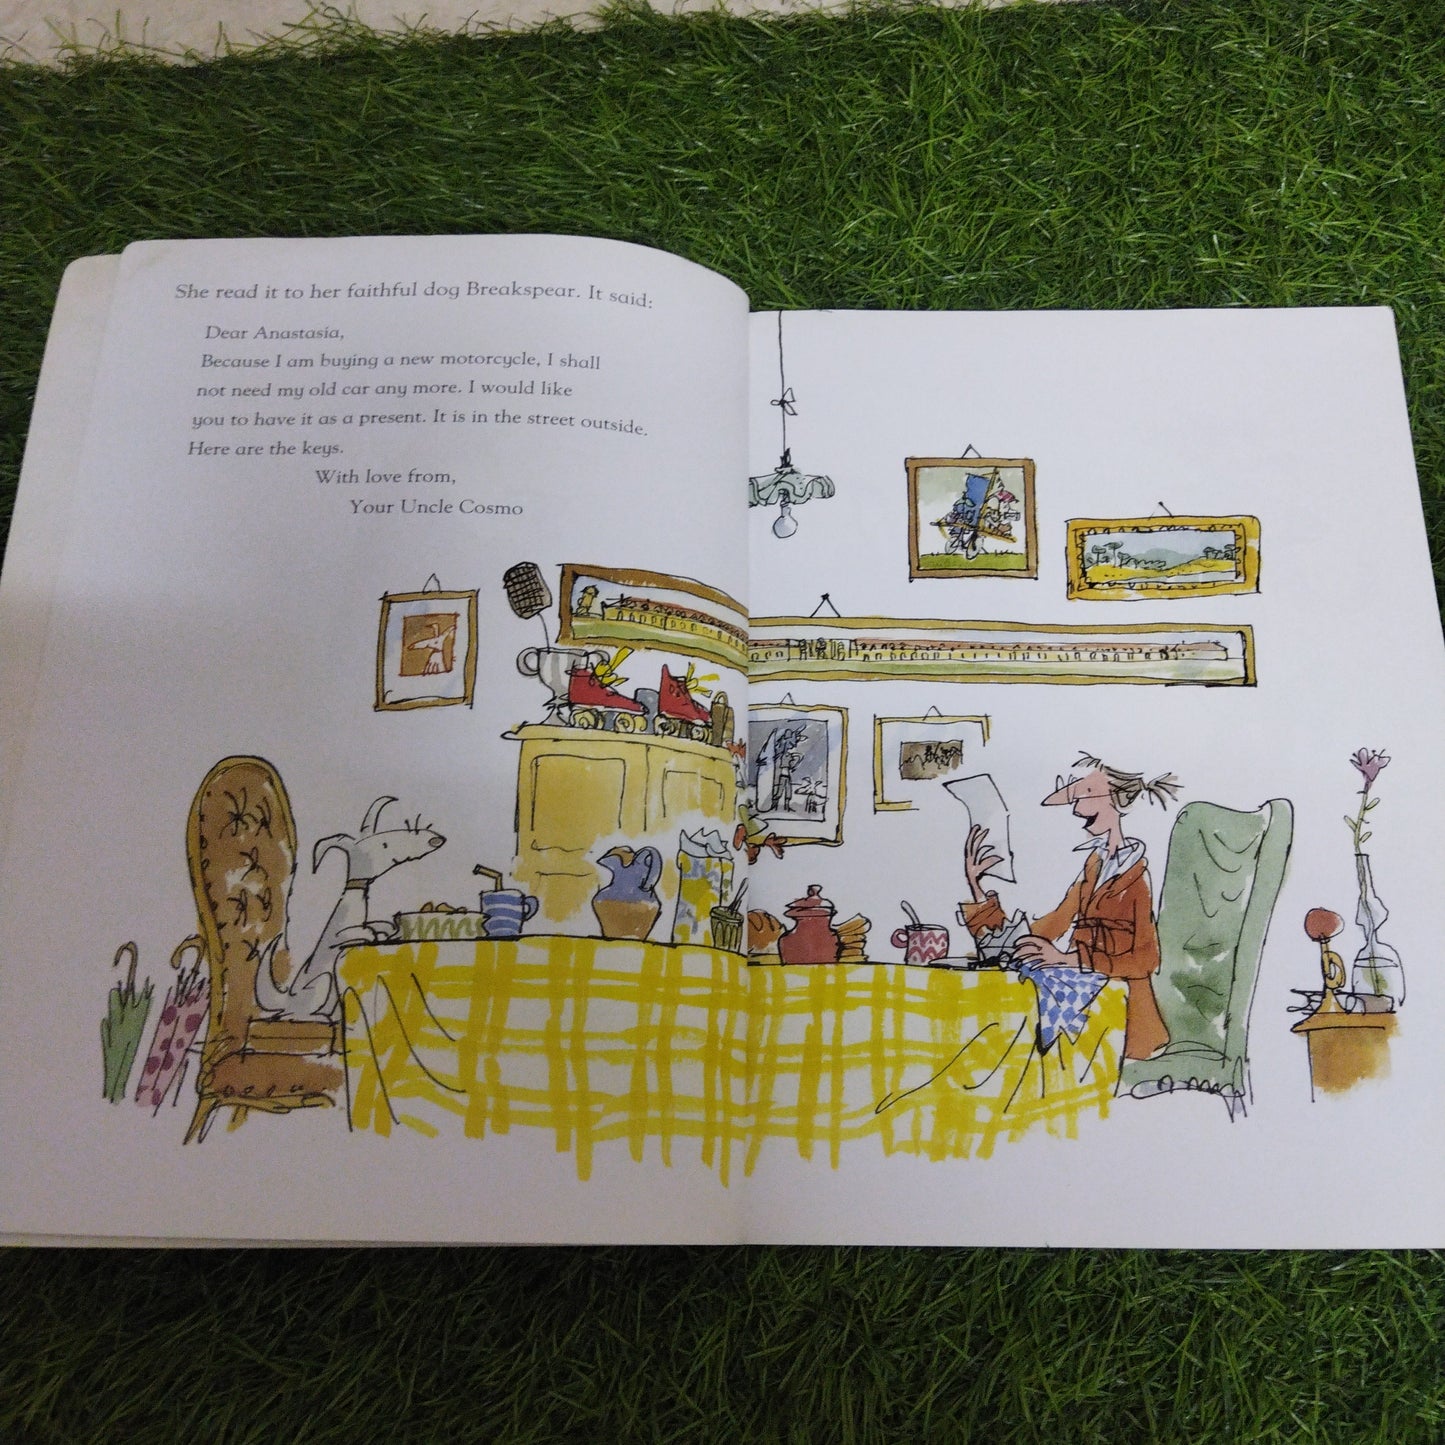 Quentin Blake Mrs Armitage Queen of the road